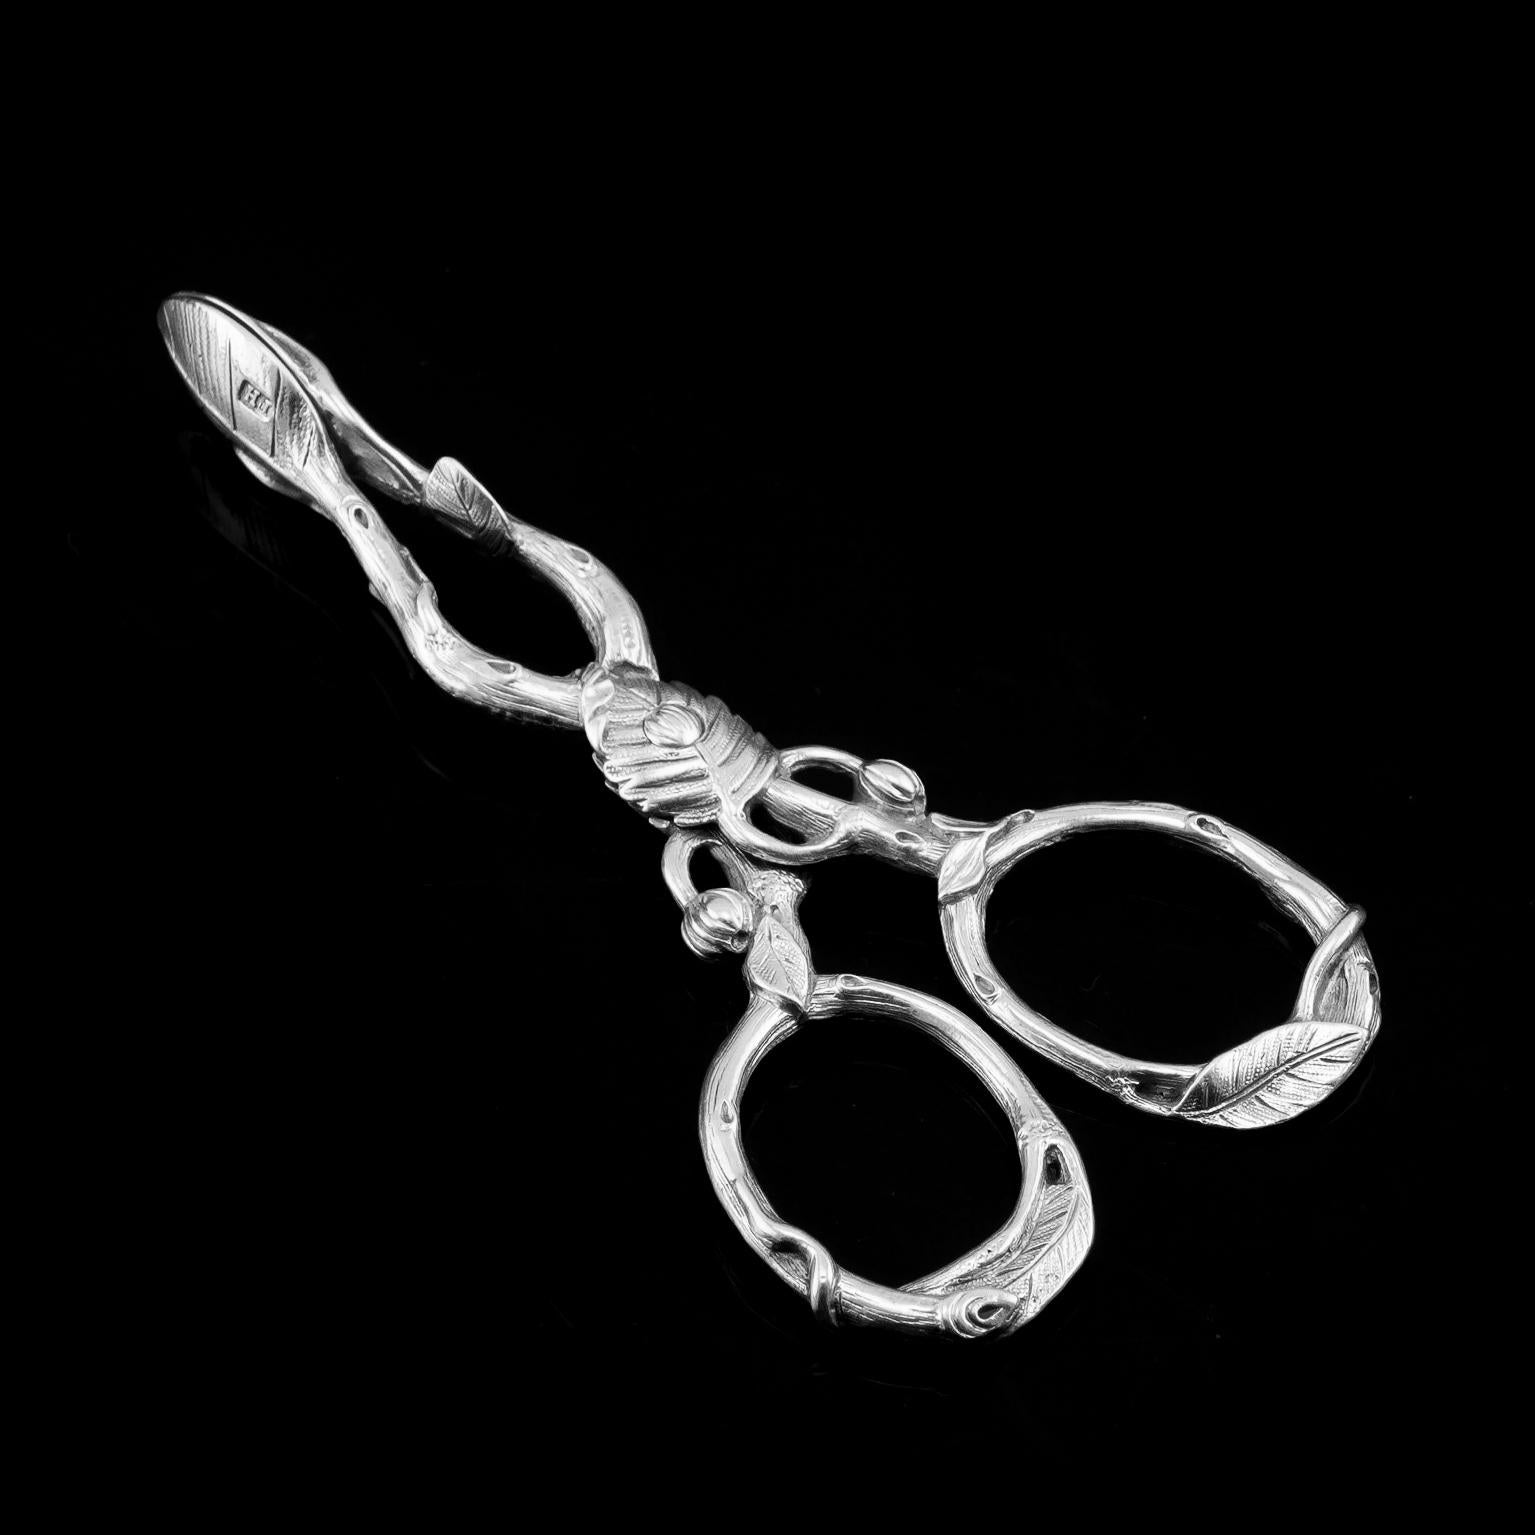 We are delighted to offer this stunning example of Victorian solid silver sugar tongs/nips made by a fine maker; Francis Higgins in London 1859.
 
The tongs are decorated with the naturalistic foliate theme throughout with an impressive amount of